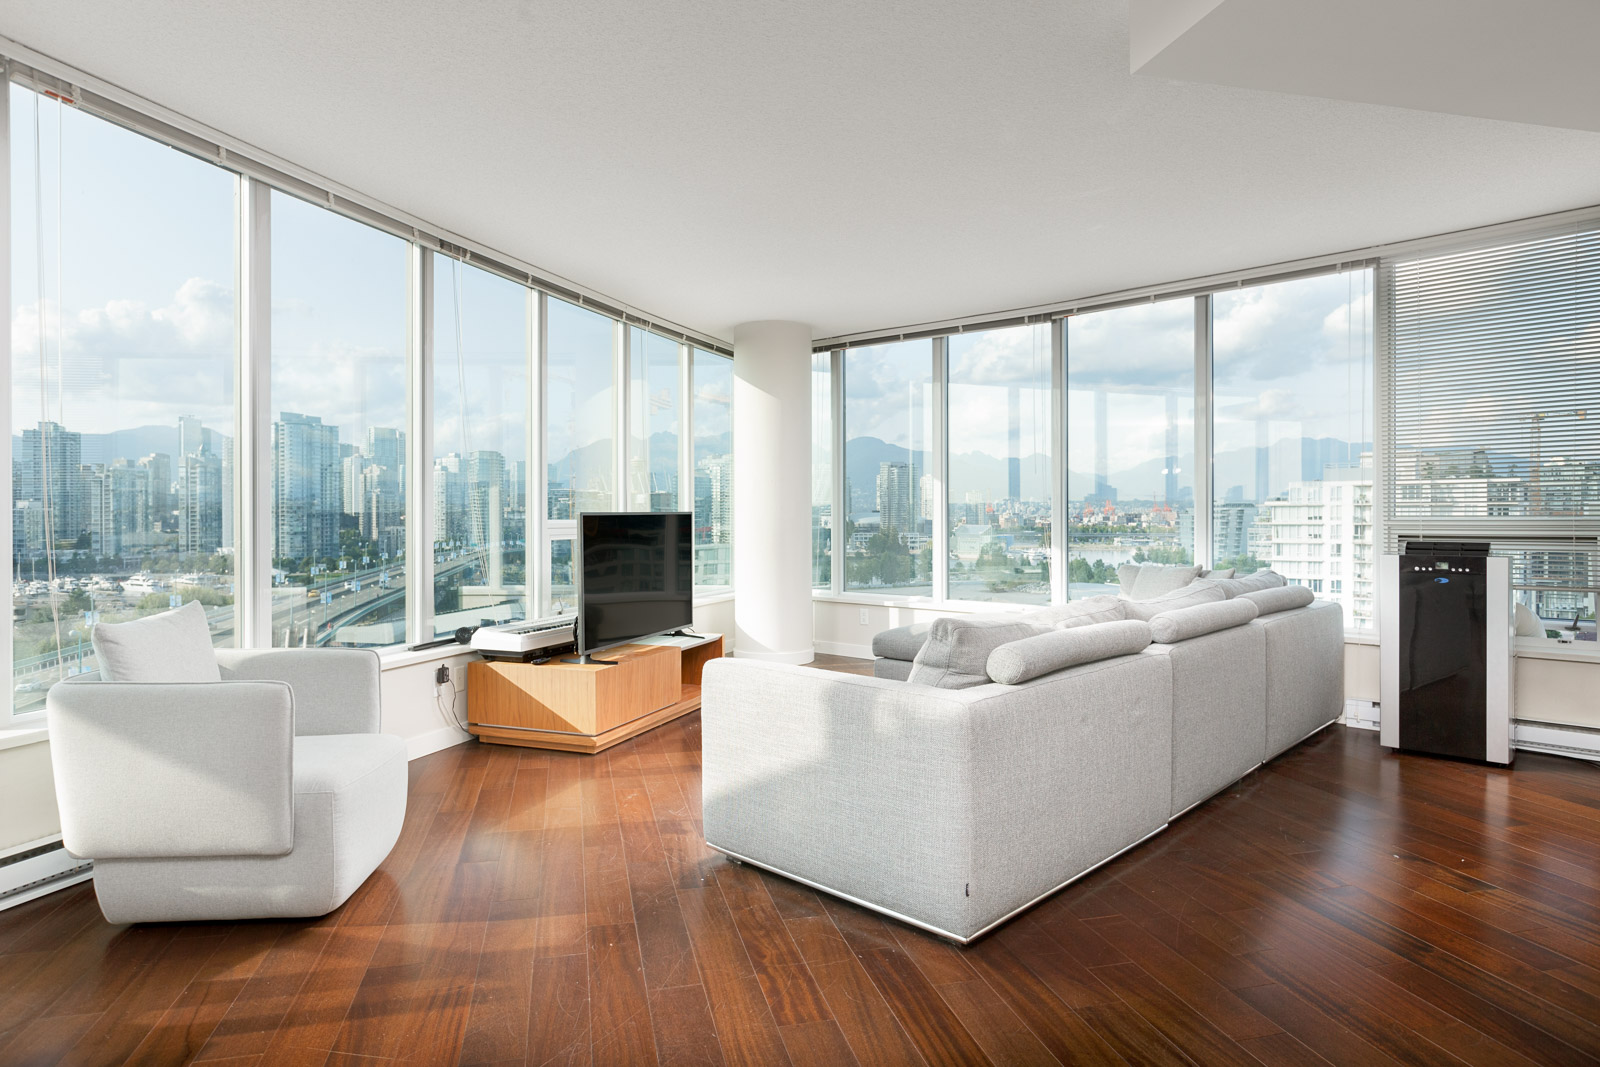 Living room white couches overlooks city skyline from Vancouver rental condo.